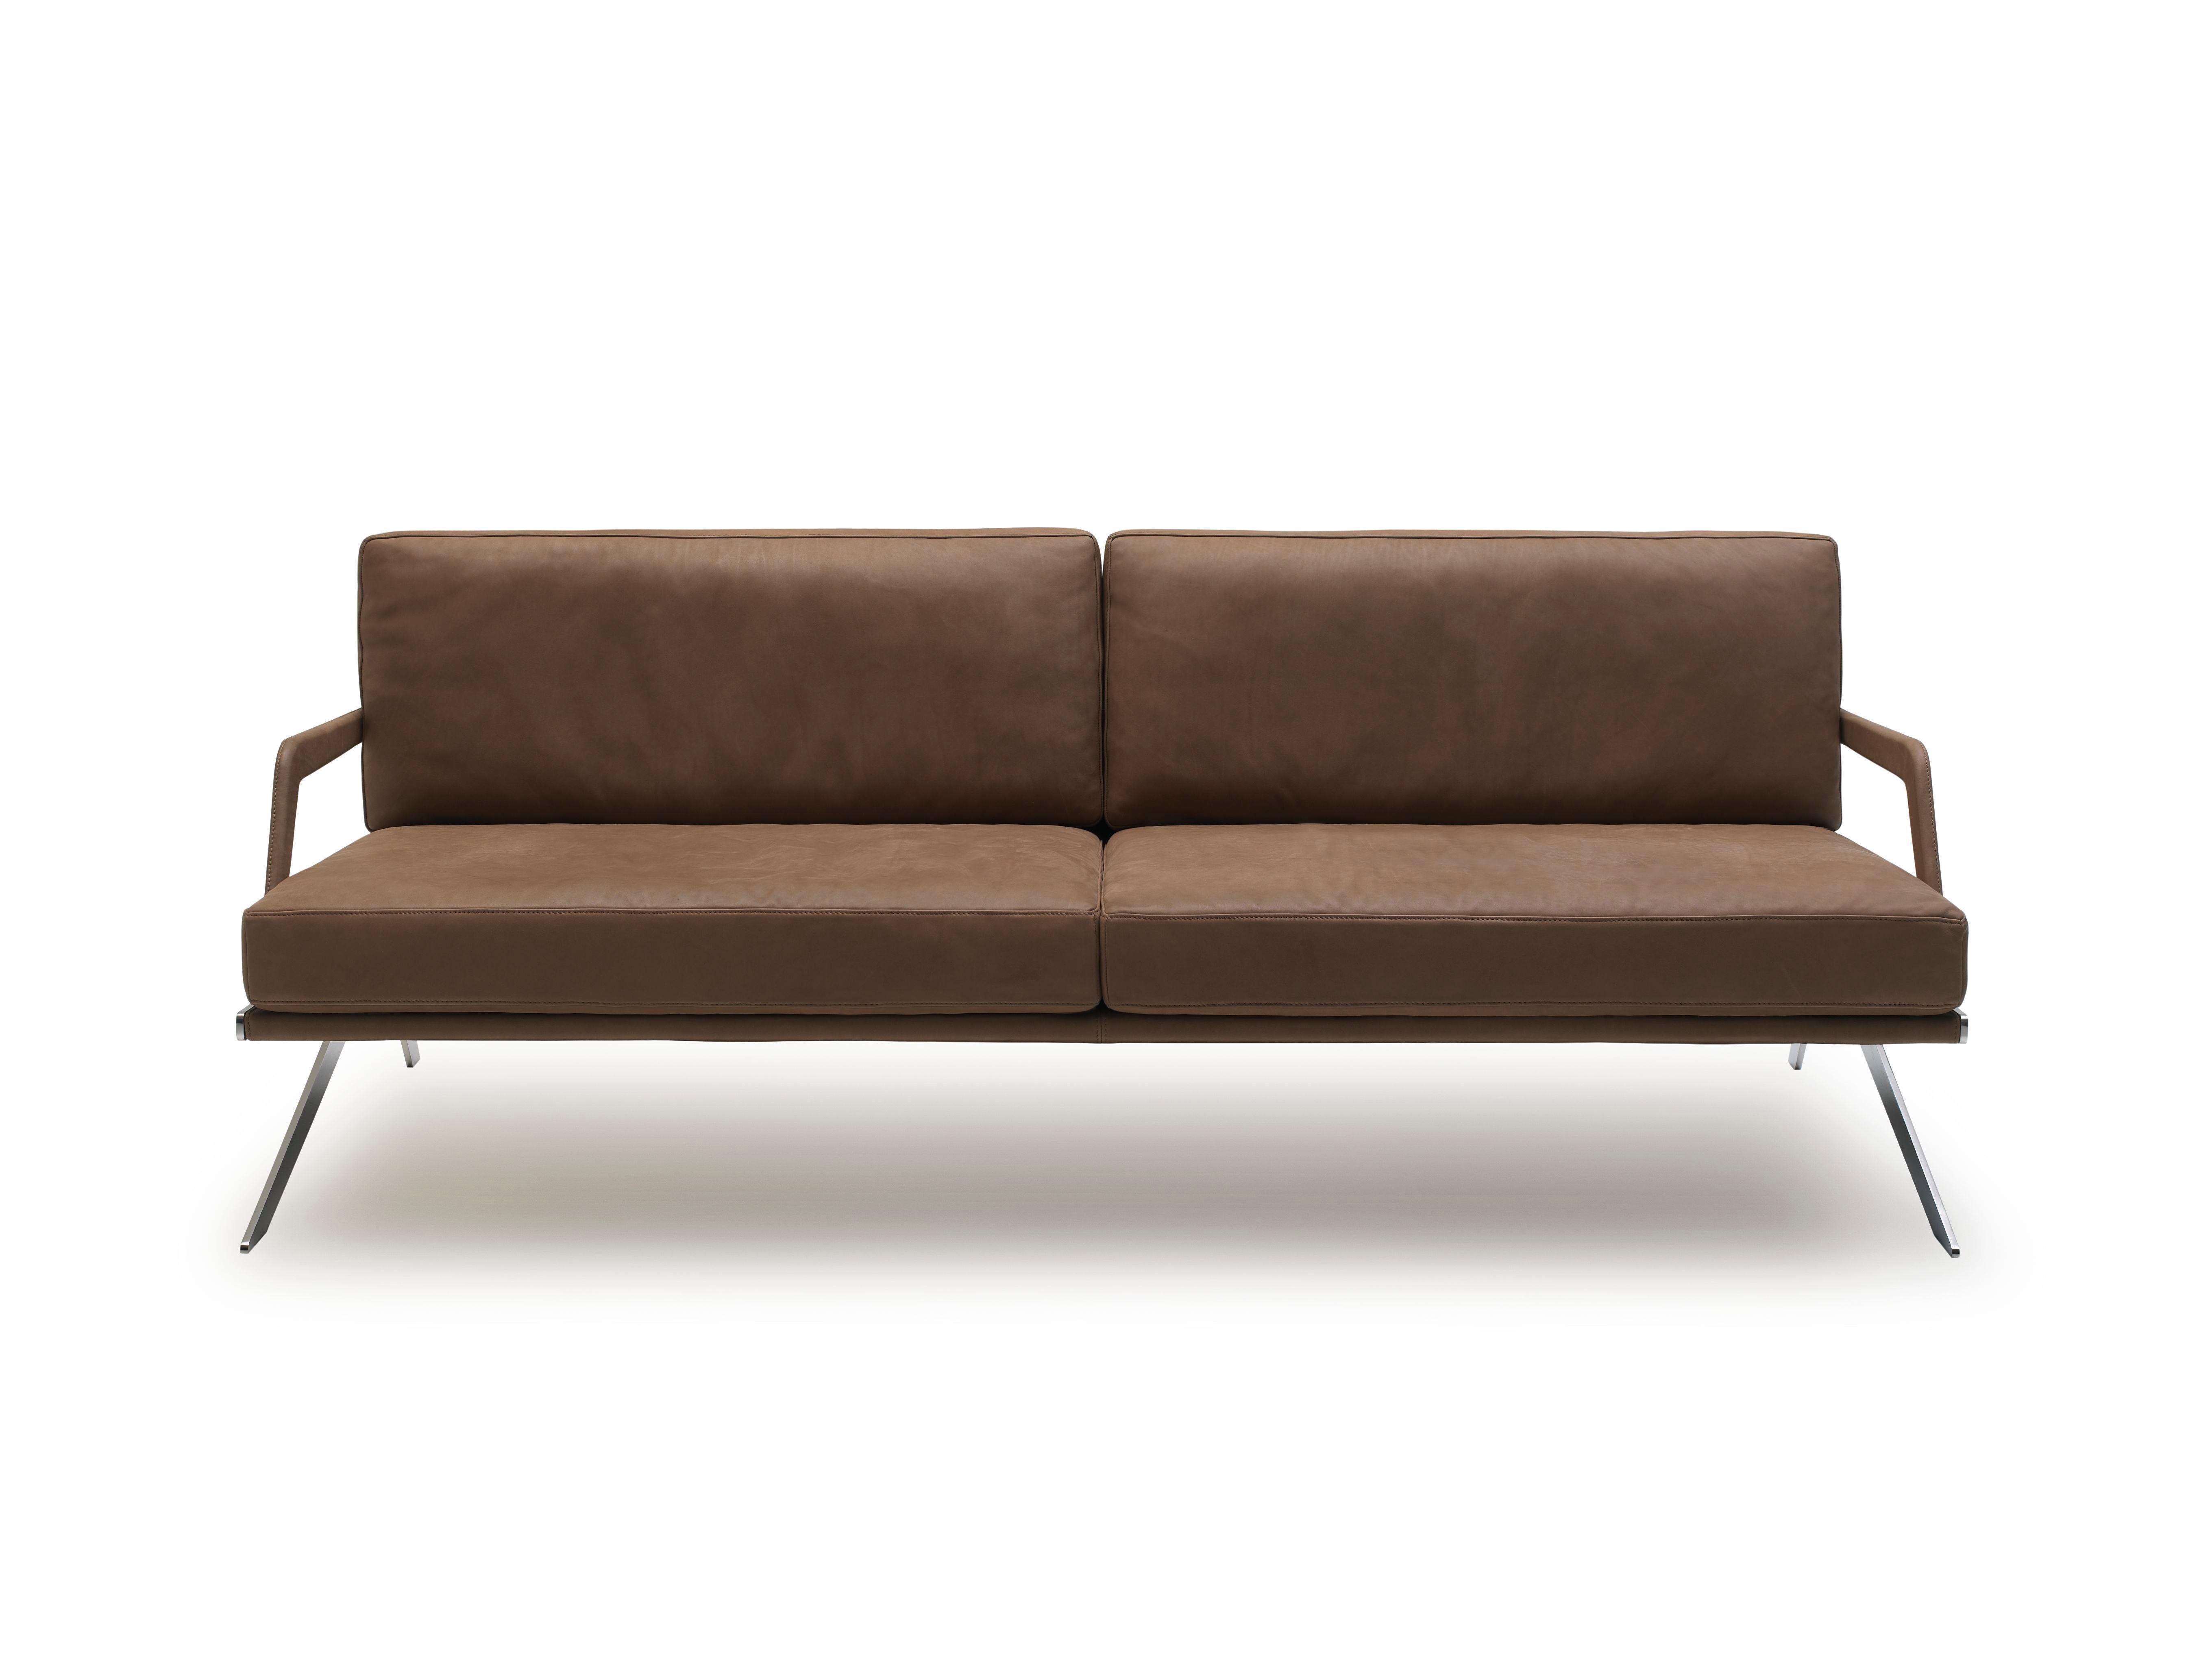 DS-60 sofa by De Sede.
Designer: Gordon Guillaumier.
Dimensions: D 54 x W 204 x H 76 cm
Materials: Metal frame. Seat with belted suspension
Fixed upholstery and armrest in leather
Seat and back cushions in fabric possible

Prices may change